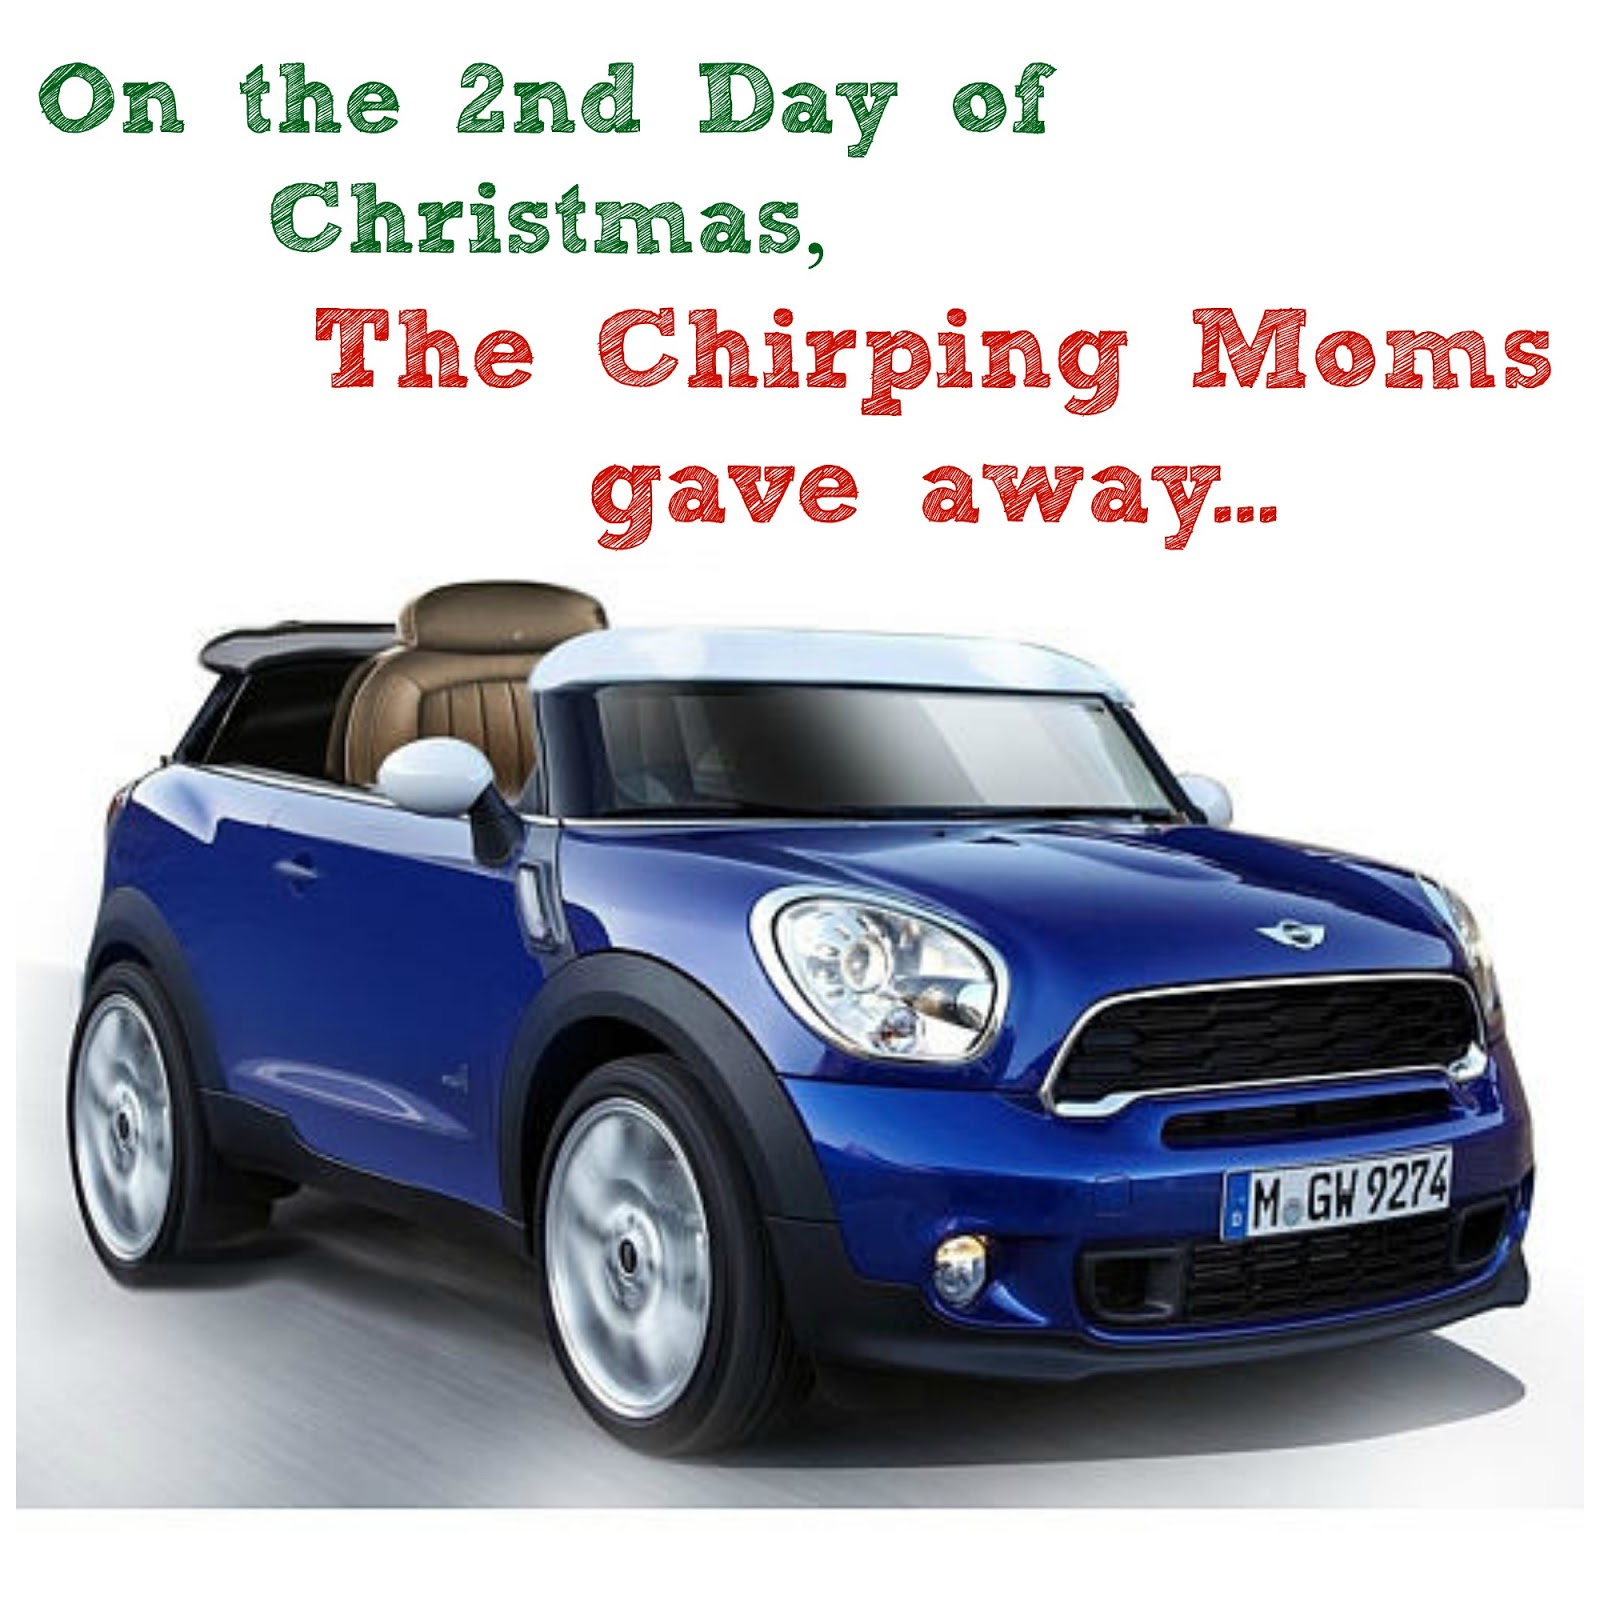 The 12 Days of Toys: Day 2, Powered Ride-On Mini Cooper Car from